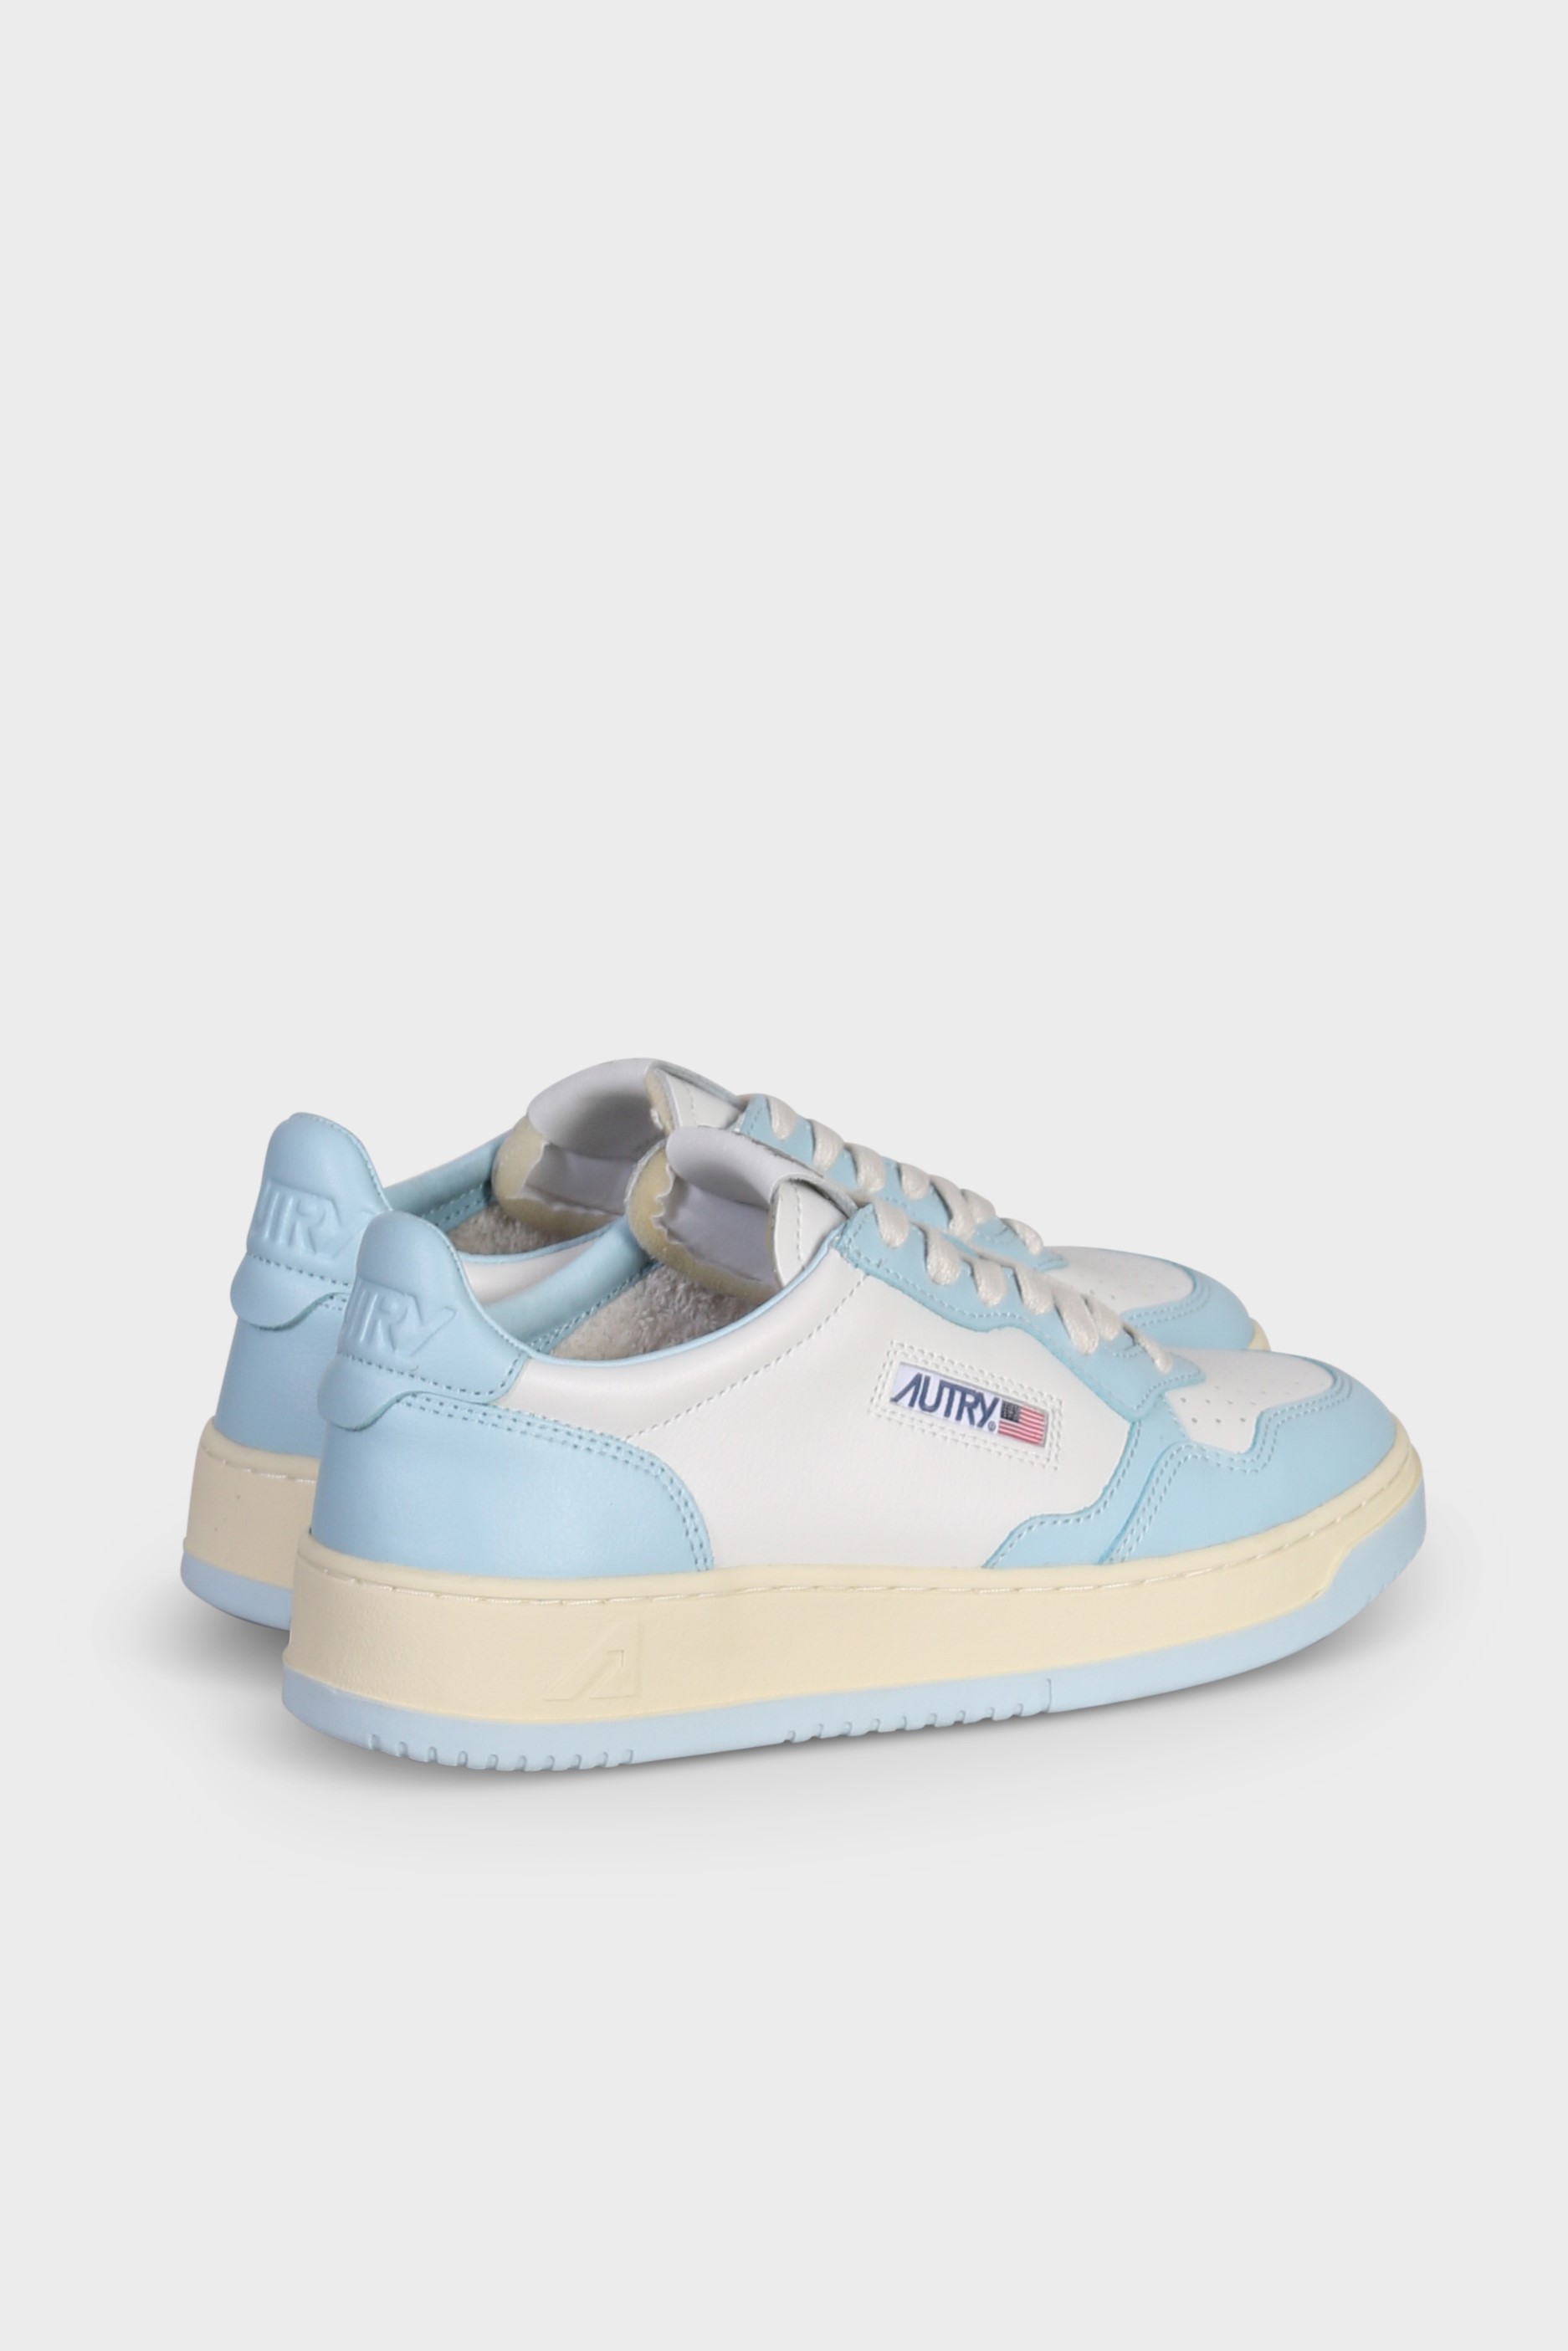 AUTRY ACTION SHOES Low Sneaker White/Stream Blue 35